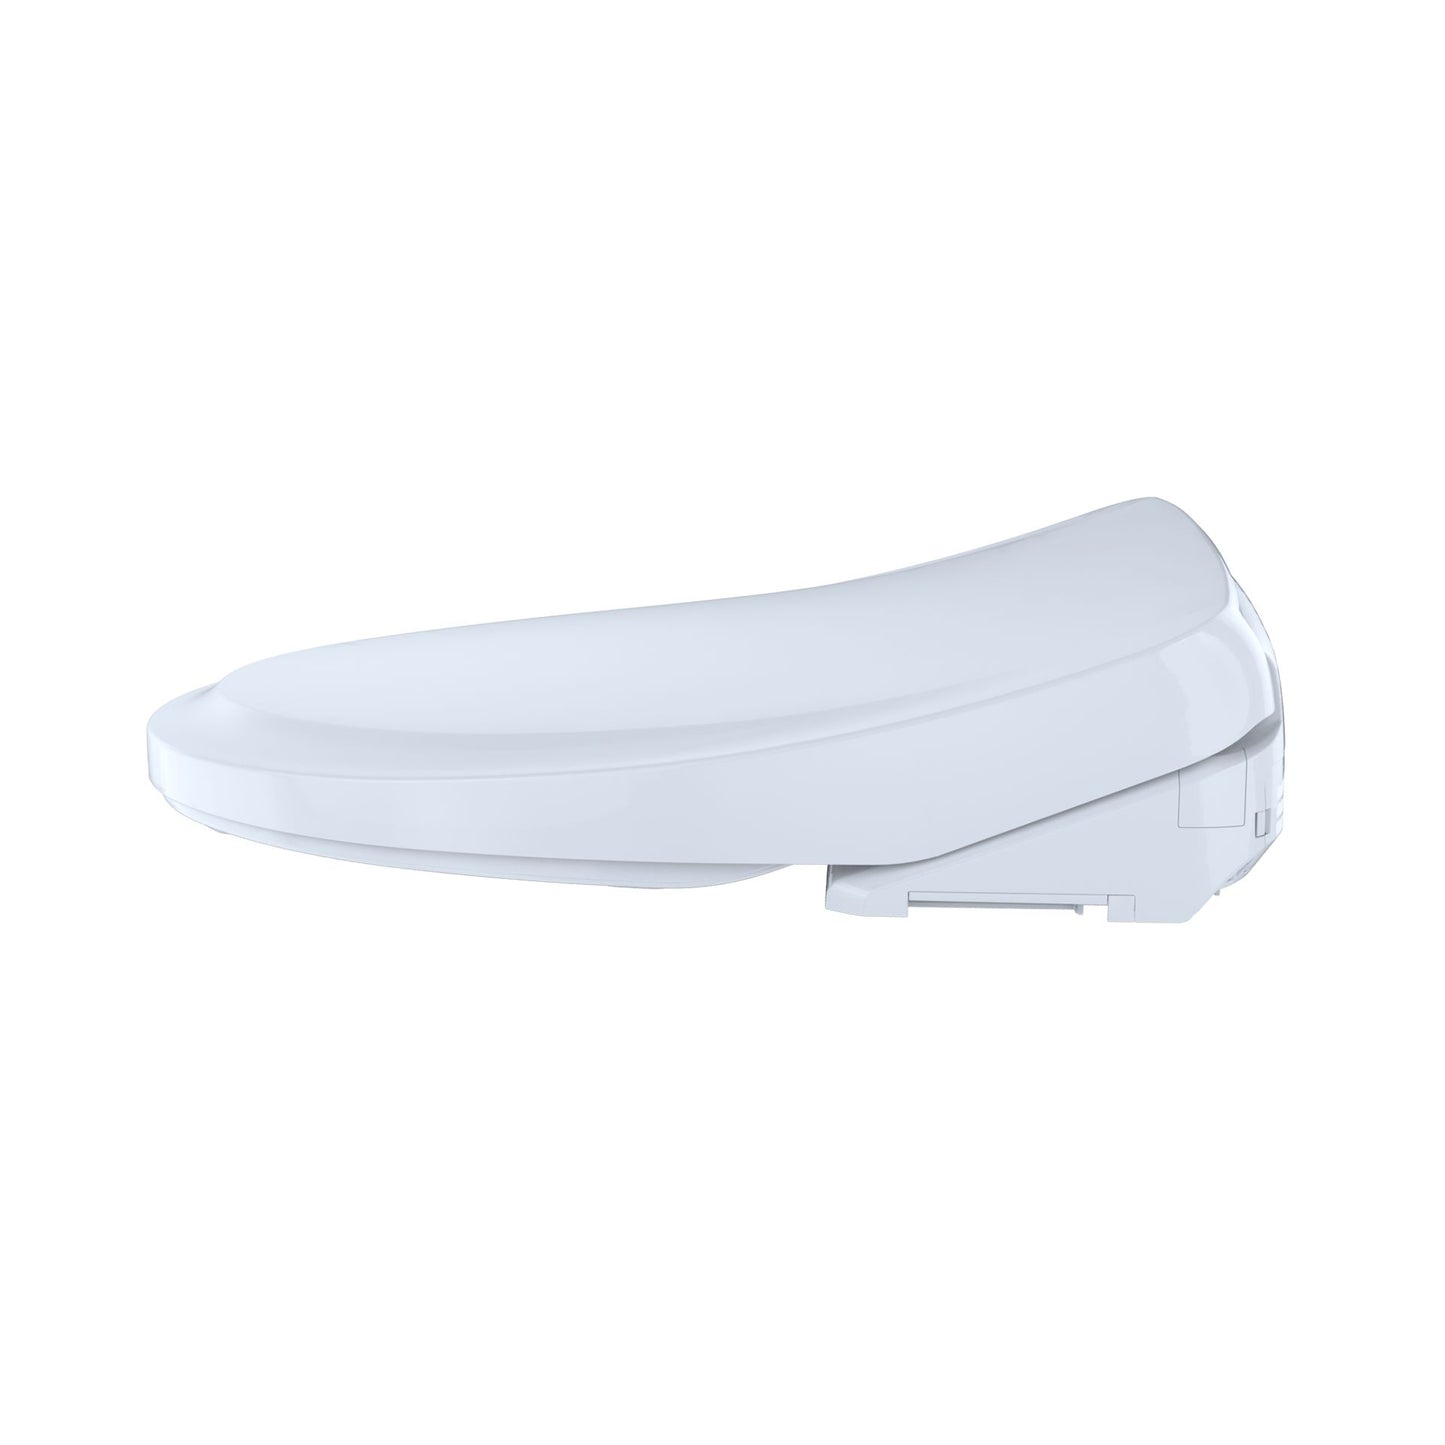 SW3054#01 - Washlet S550E Elongated Bidet Seat with Remote and Dual Action Spray- Cotton